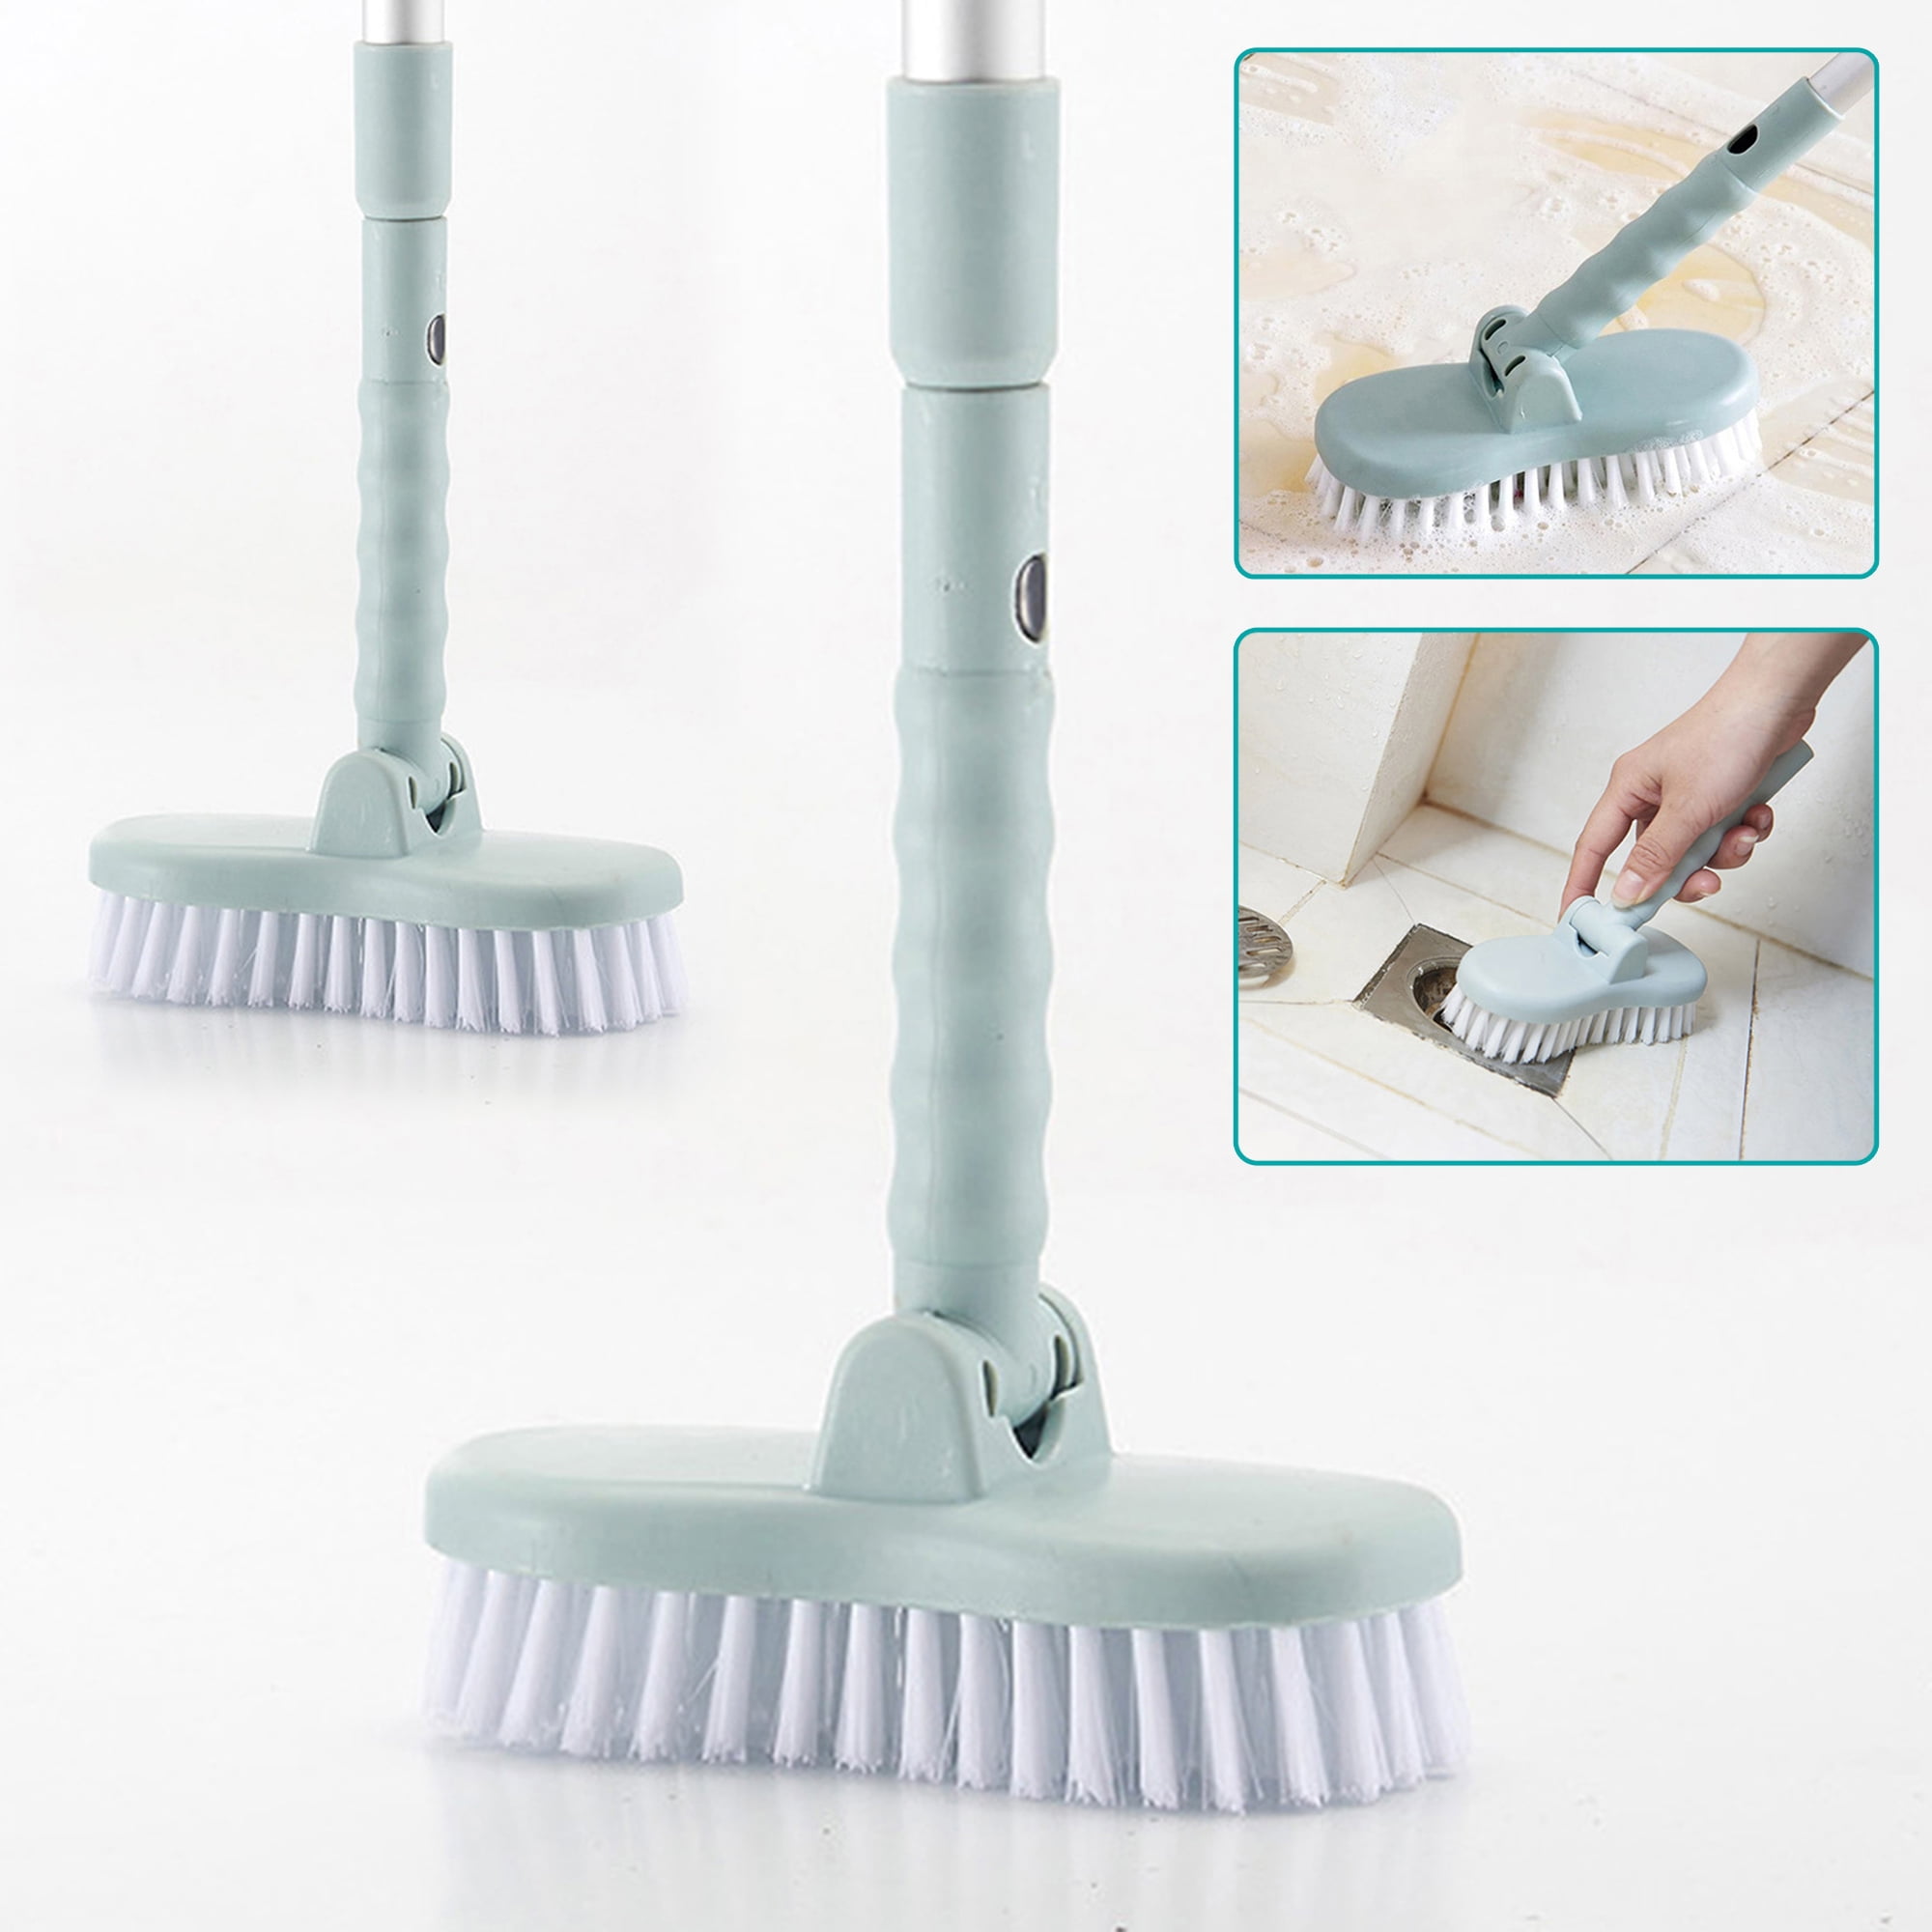 Sesaver Scrub Cleaning Brush with Long Handle 3 in 1 Shower Cleaning Brush Tub Tile Scrubber Brush Extendable Multifunctional 18